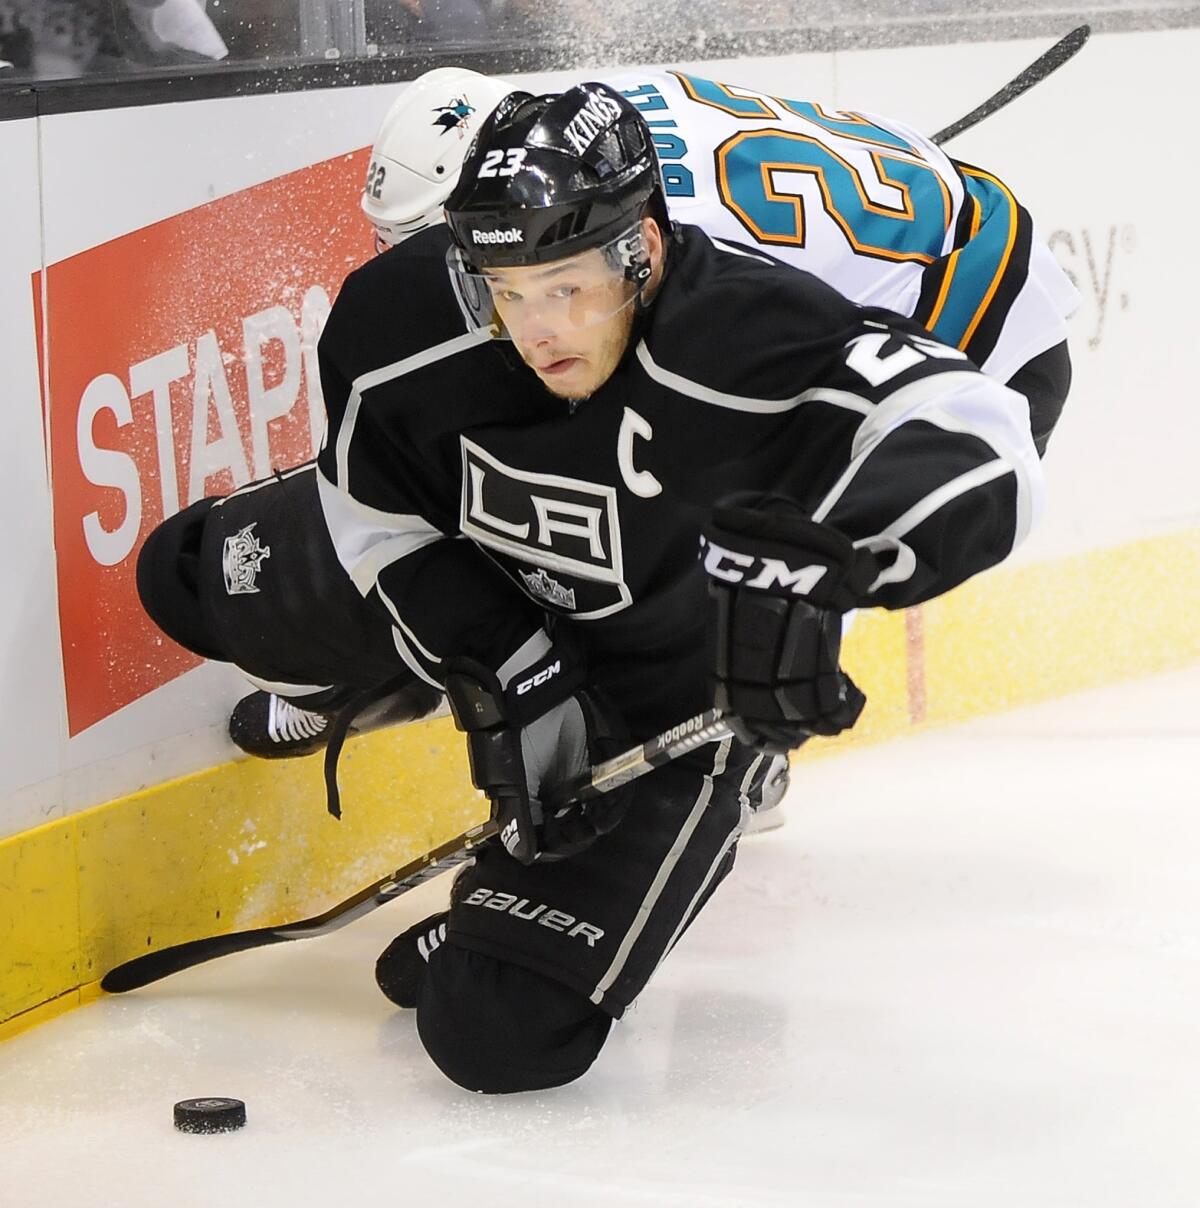 Kings captain Dustin Brown might not be healthy enough to play in the team's season opener against the Minnesota Wild on Oct. 3.